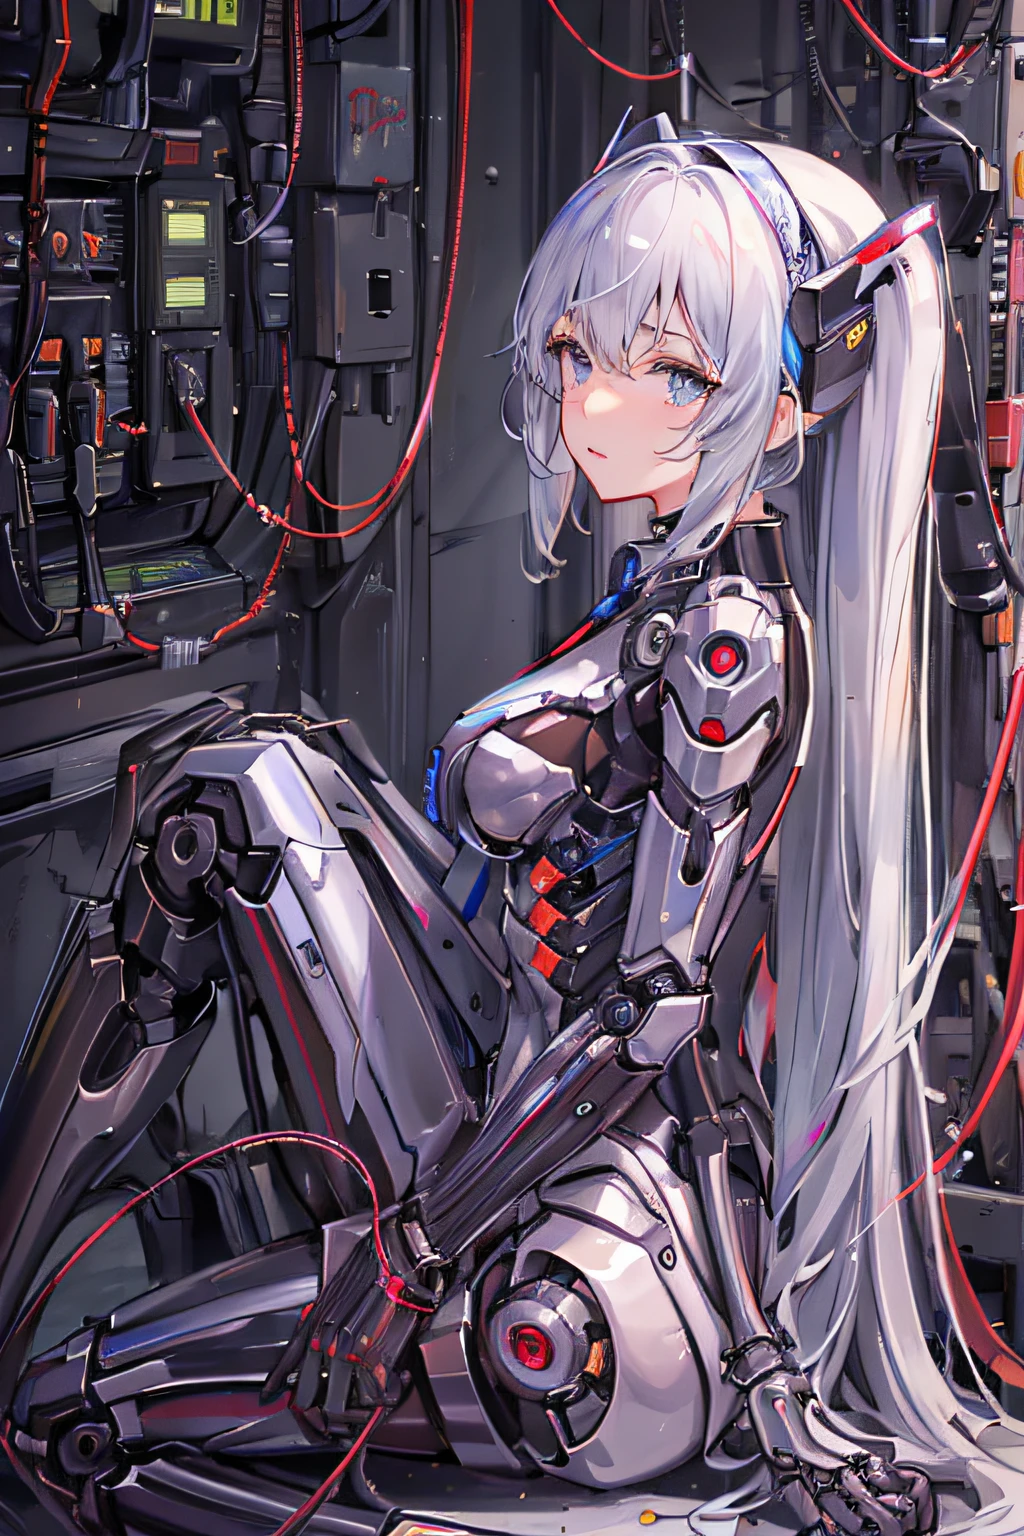 Anime 소녀 sitting on the ground with a robot in front of her, cyborg - 소녀 with silver hair, 생체역학적 오빠, Cute cyborg 소녀, Cyborg 소녀, beautiful 소녀 cyborg, 완벽한 애니메이션 사이보그 여성, perfect android 소녀, 사이보그 - 소녀, 애니메이션 사이보그, beutiful white 소녀 cyborg, 완전 로봇식!! 소녀, Cyberpunk anime 소녀 mecha